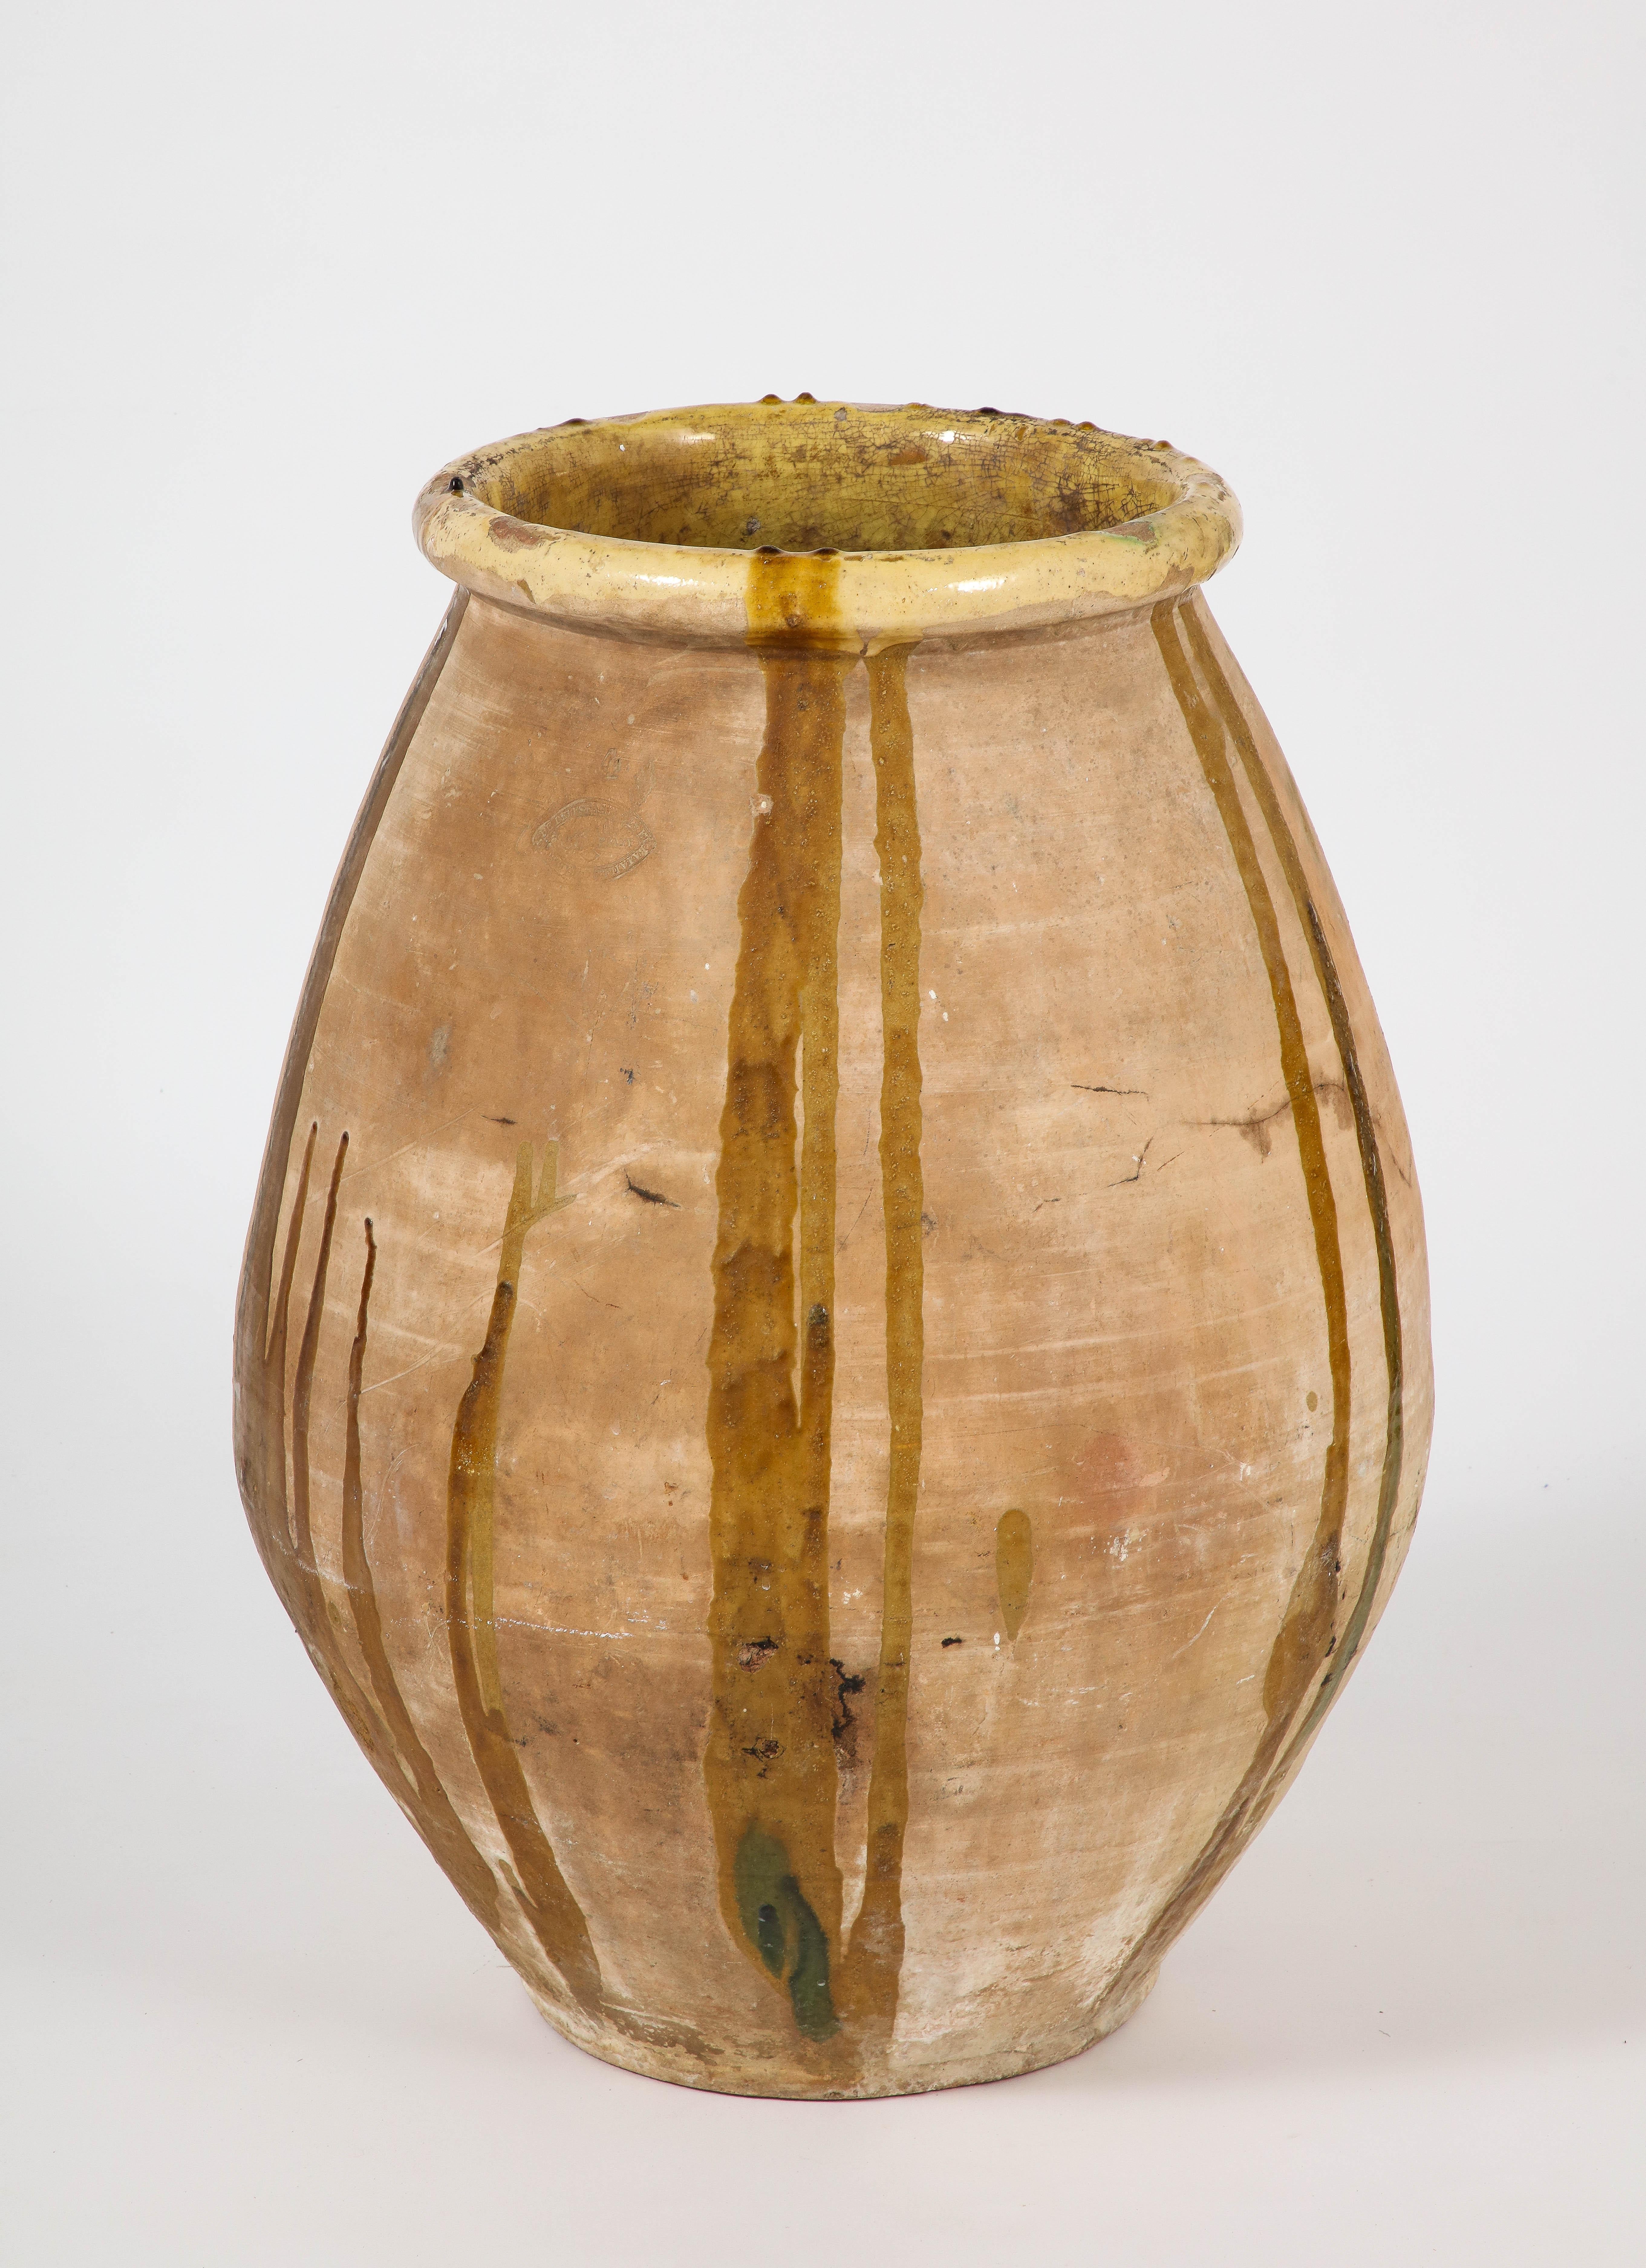 French Provincial 18th Century Terracotta Olive Oil Biot Jar with Glaze For Sale 7